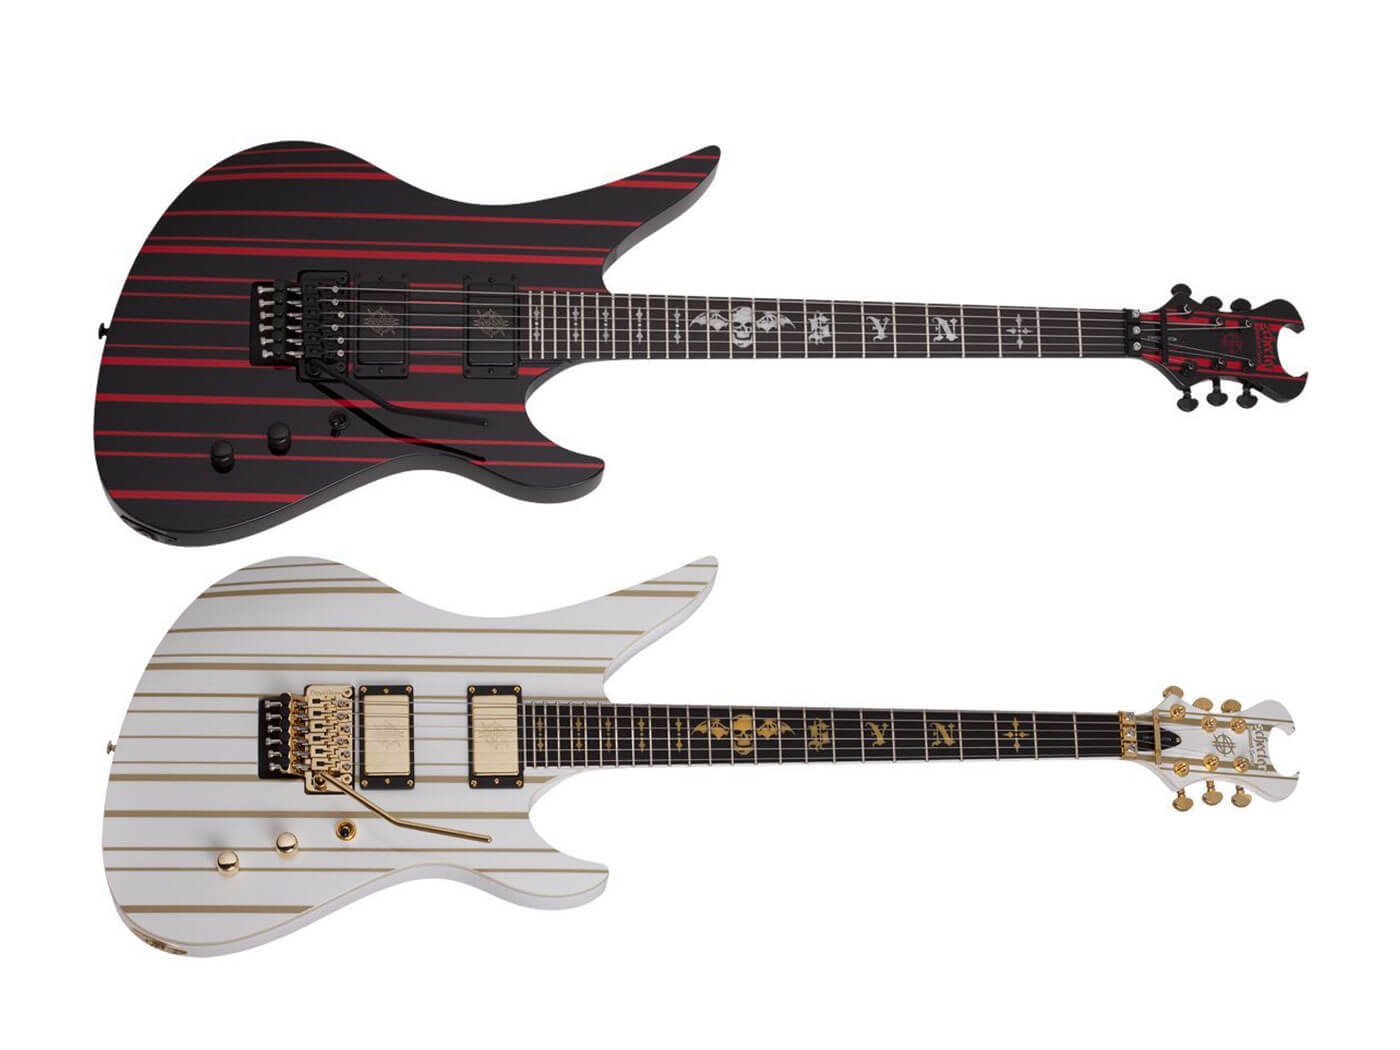 Synyster gates announces two limited autographed signature schecters all things